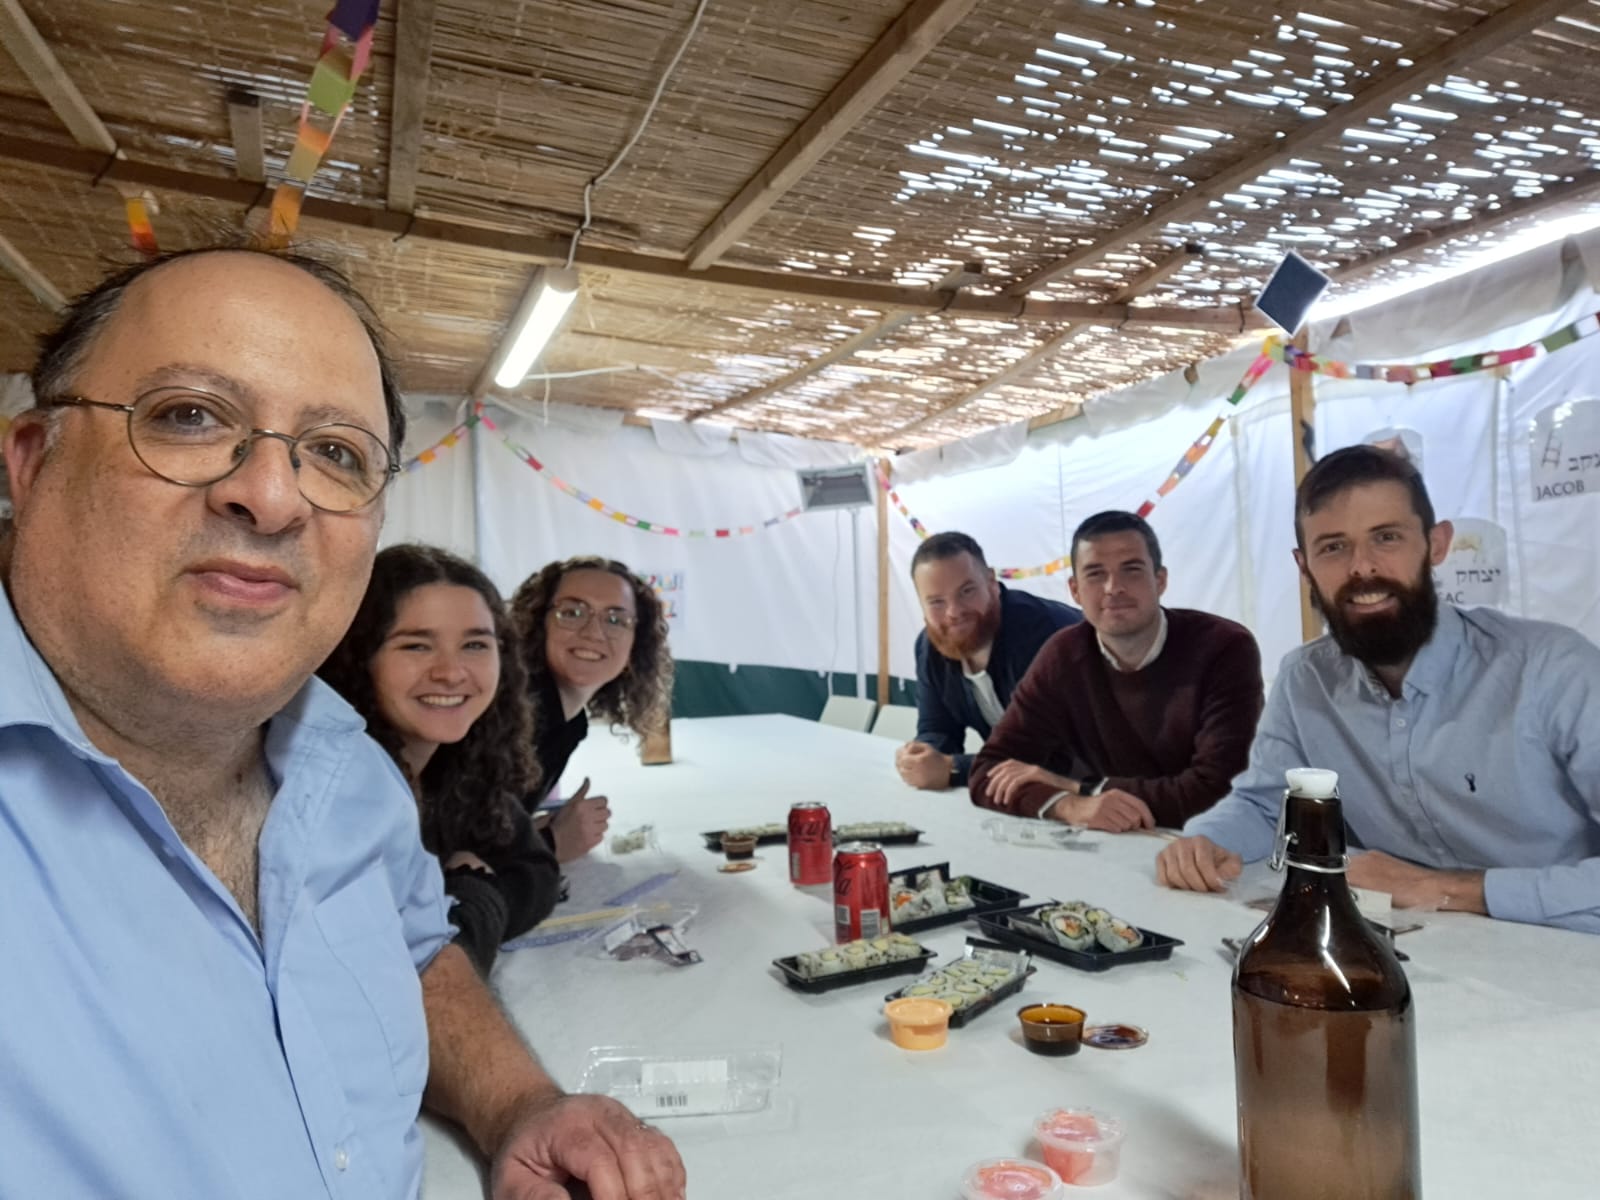 The HIAS+JCORE team sit around a table in a Sukkah.